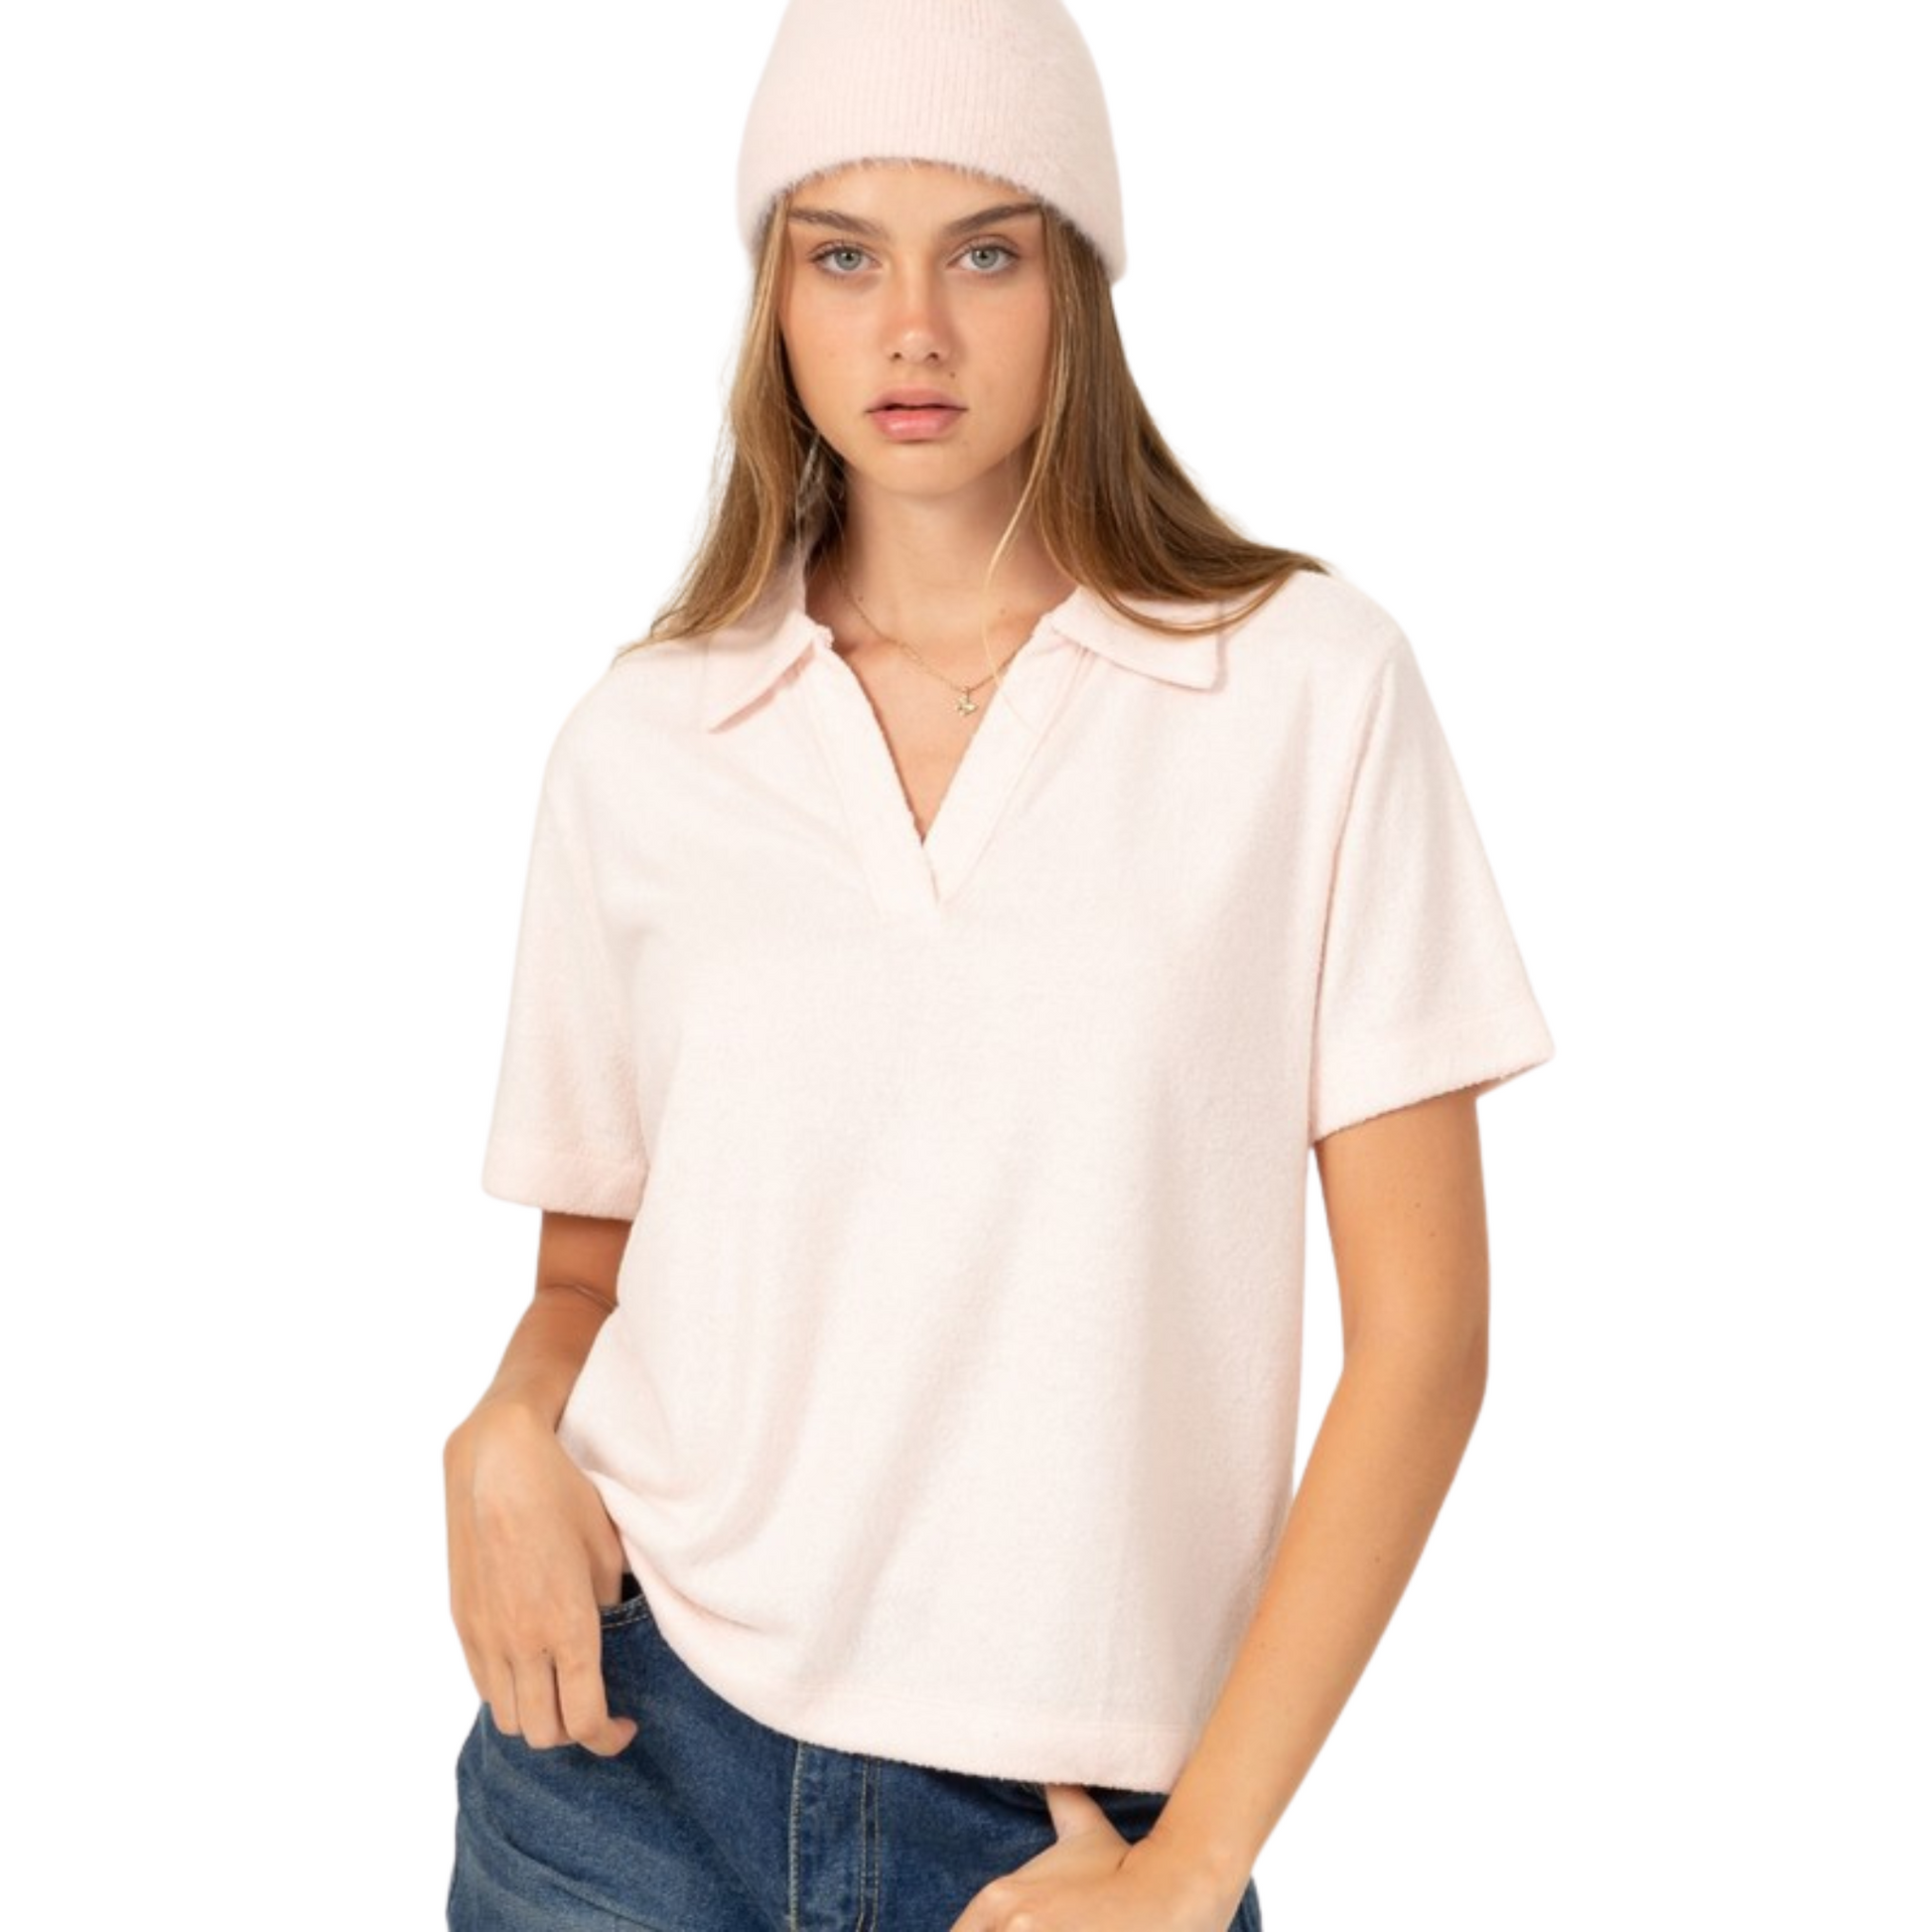 Collared short sleeve top in pale pink